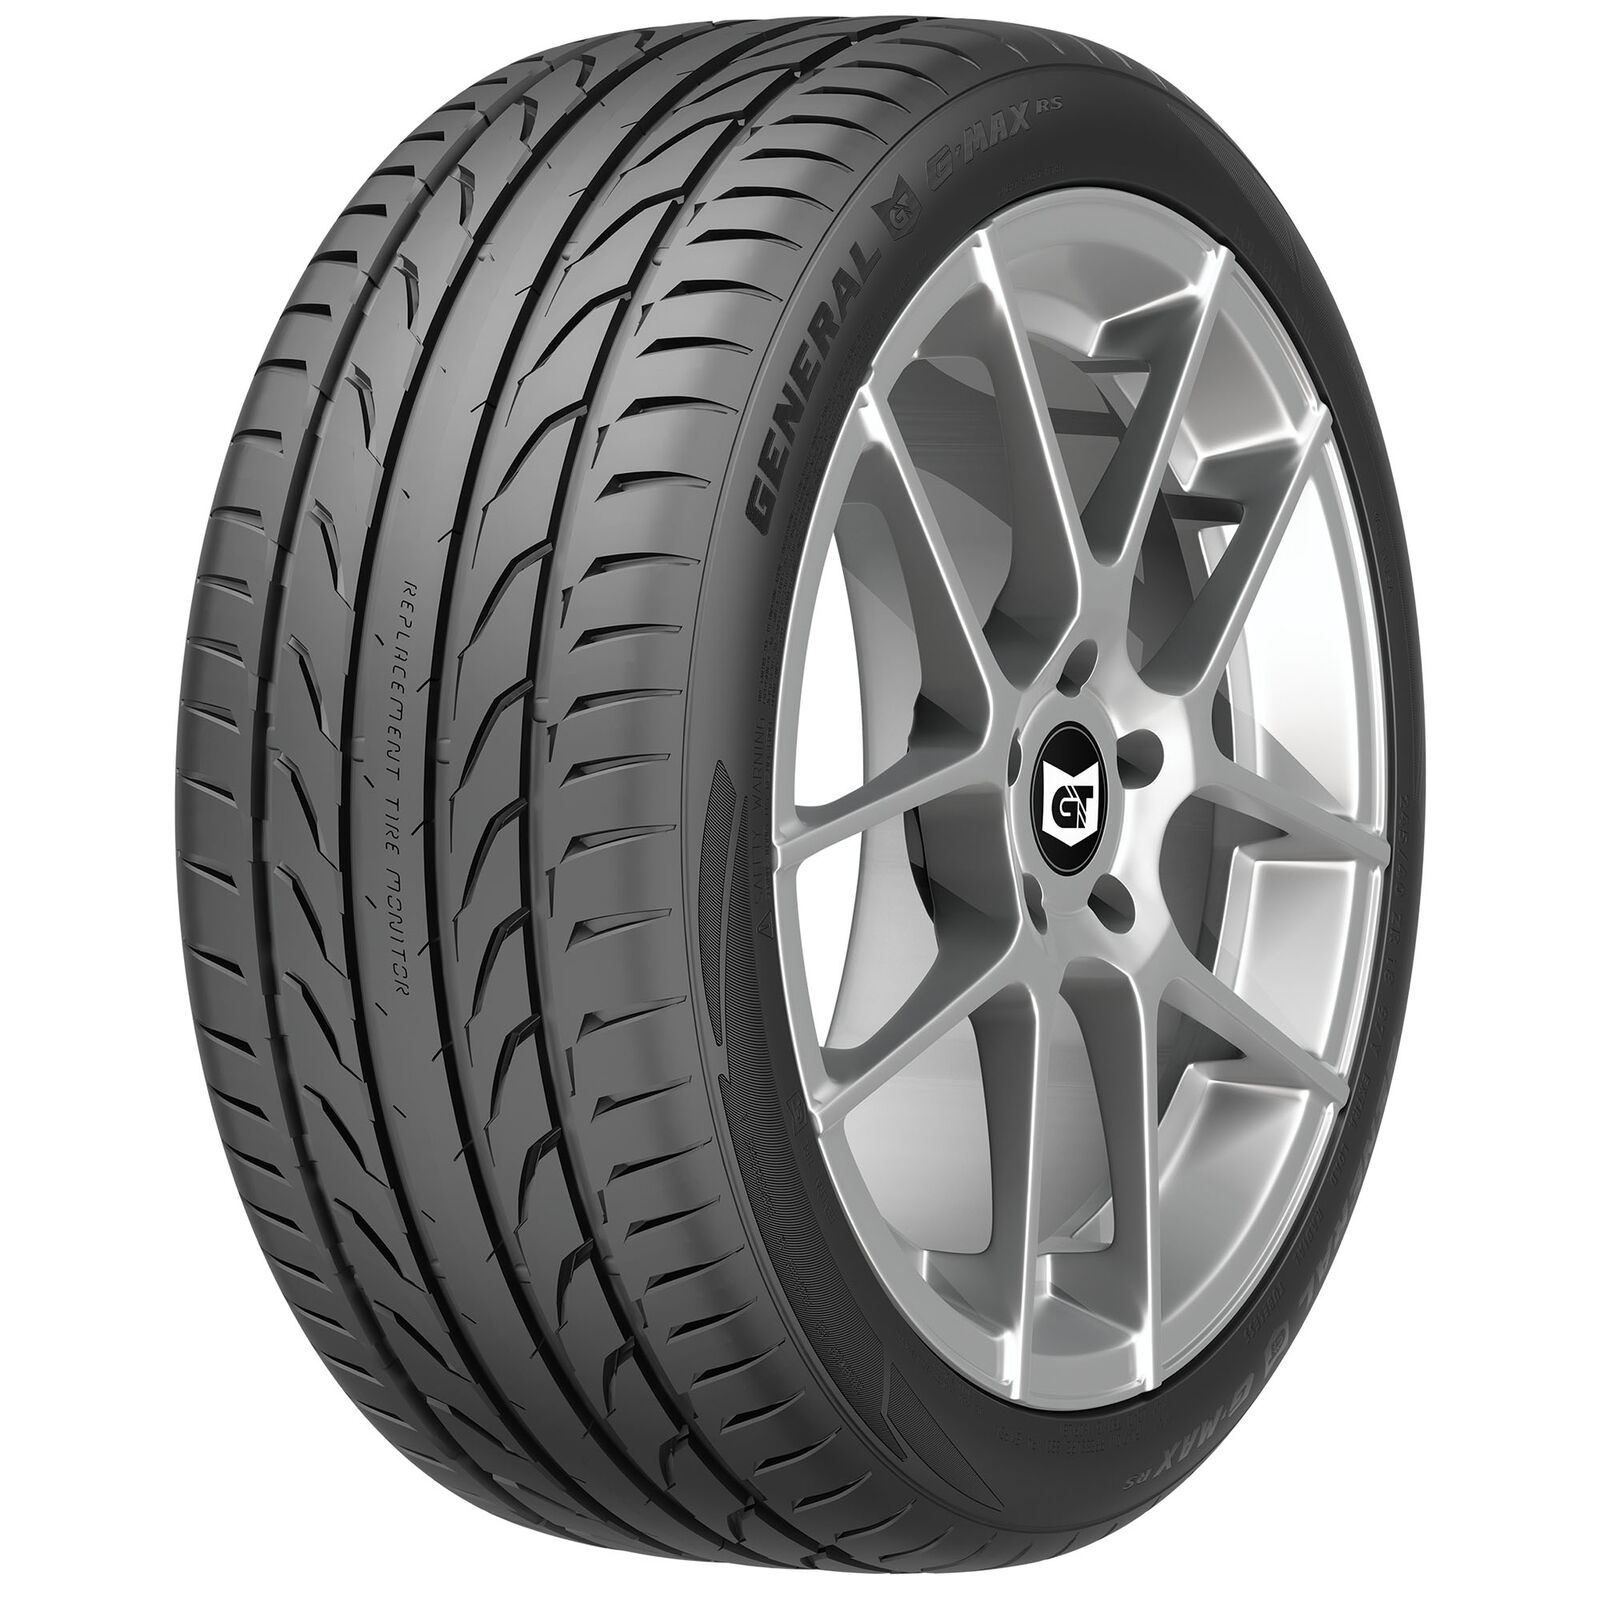 2 New General G-max Rs  - 295/30zr18 Tires 2953018 295 30 18